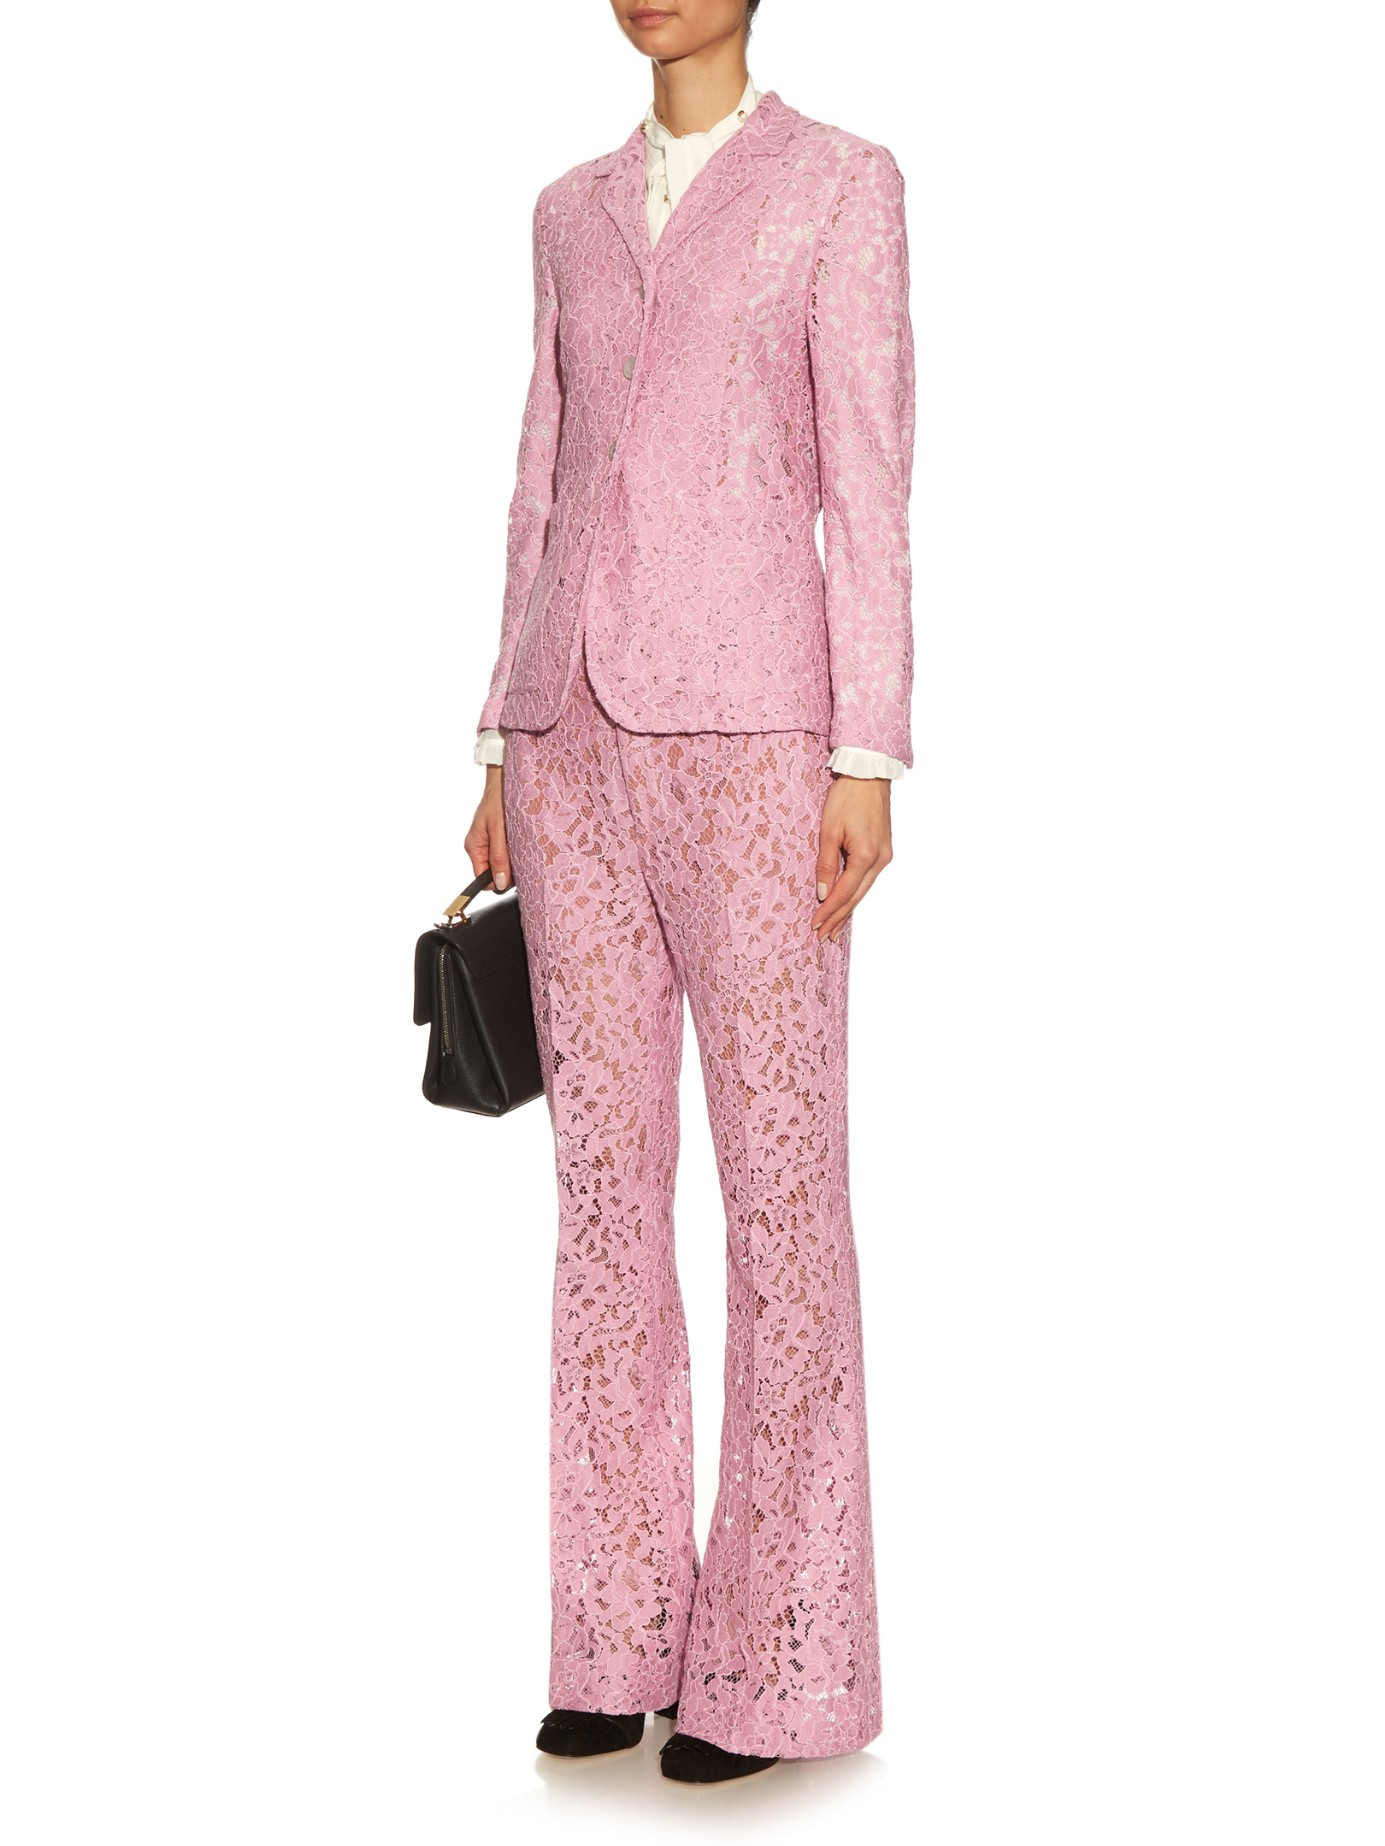 gucci pink trousers